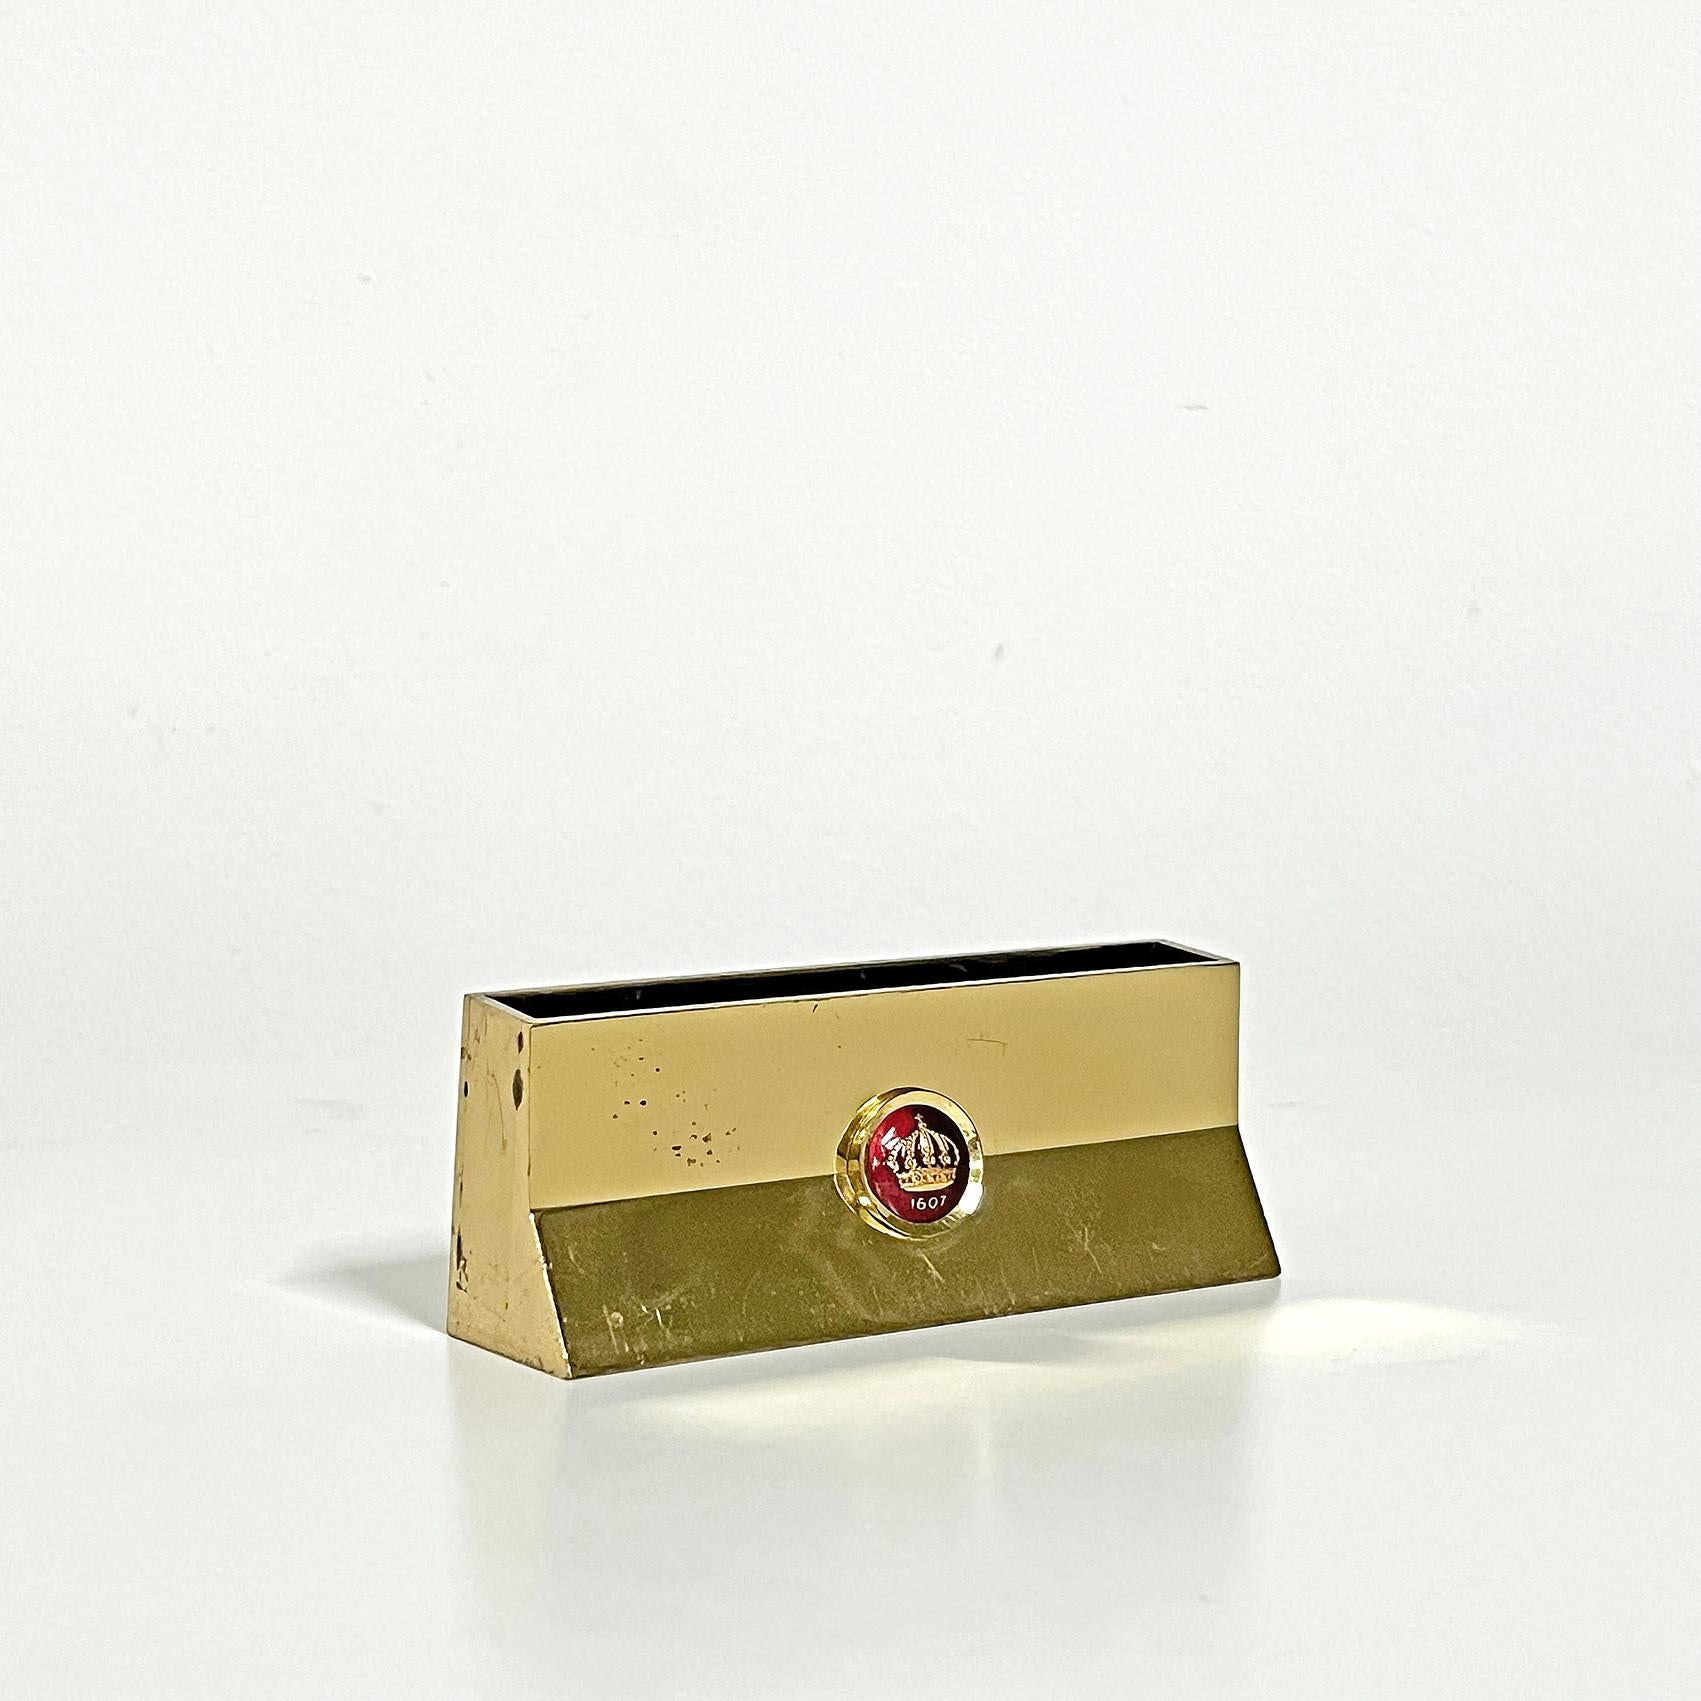 Rare, Scandinavian Modern business card holder by Pierre Forsell for Skultuna.
Signed with makers mark.
Wear and patina consistent with age and use. Scratches, rust, as seen on the pictures. 